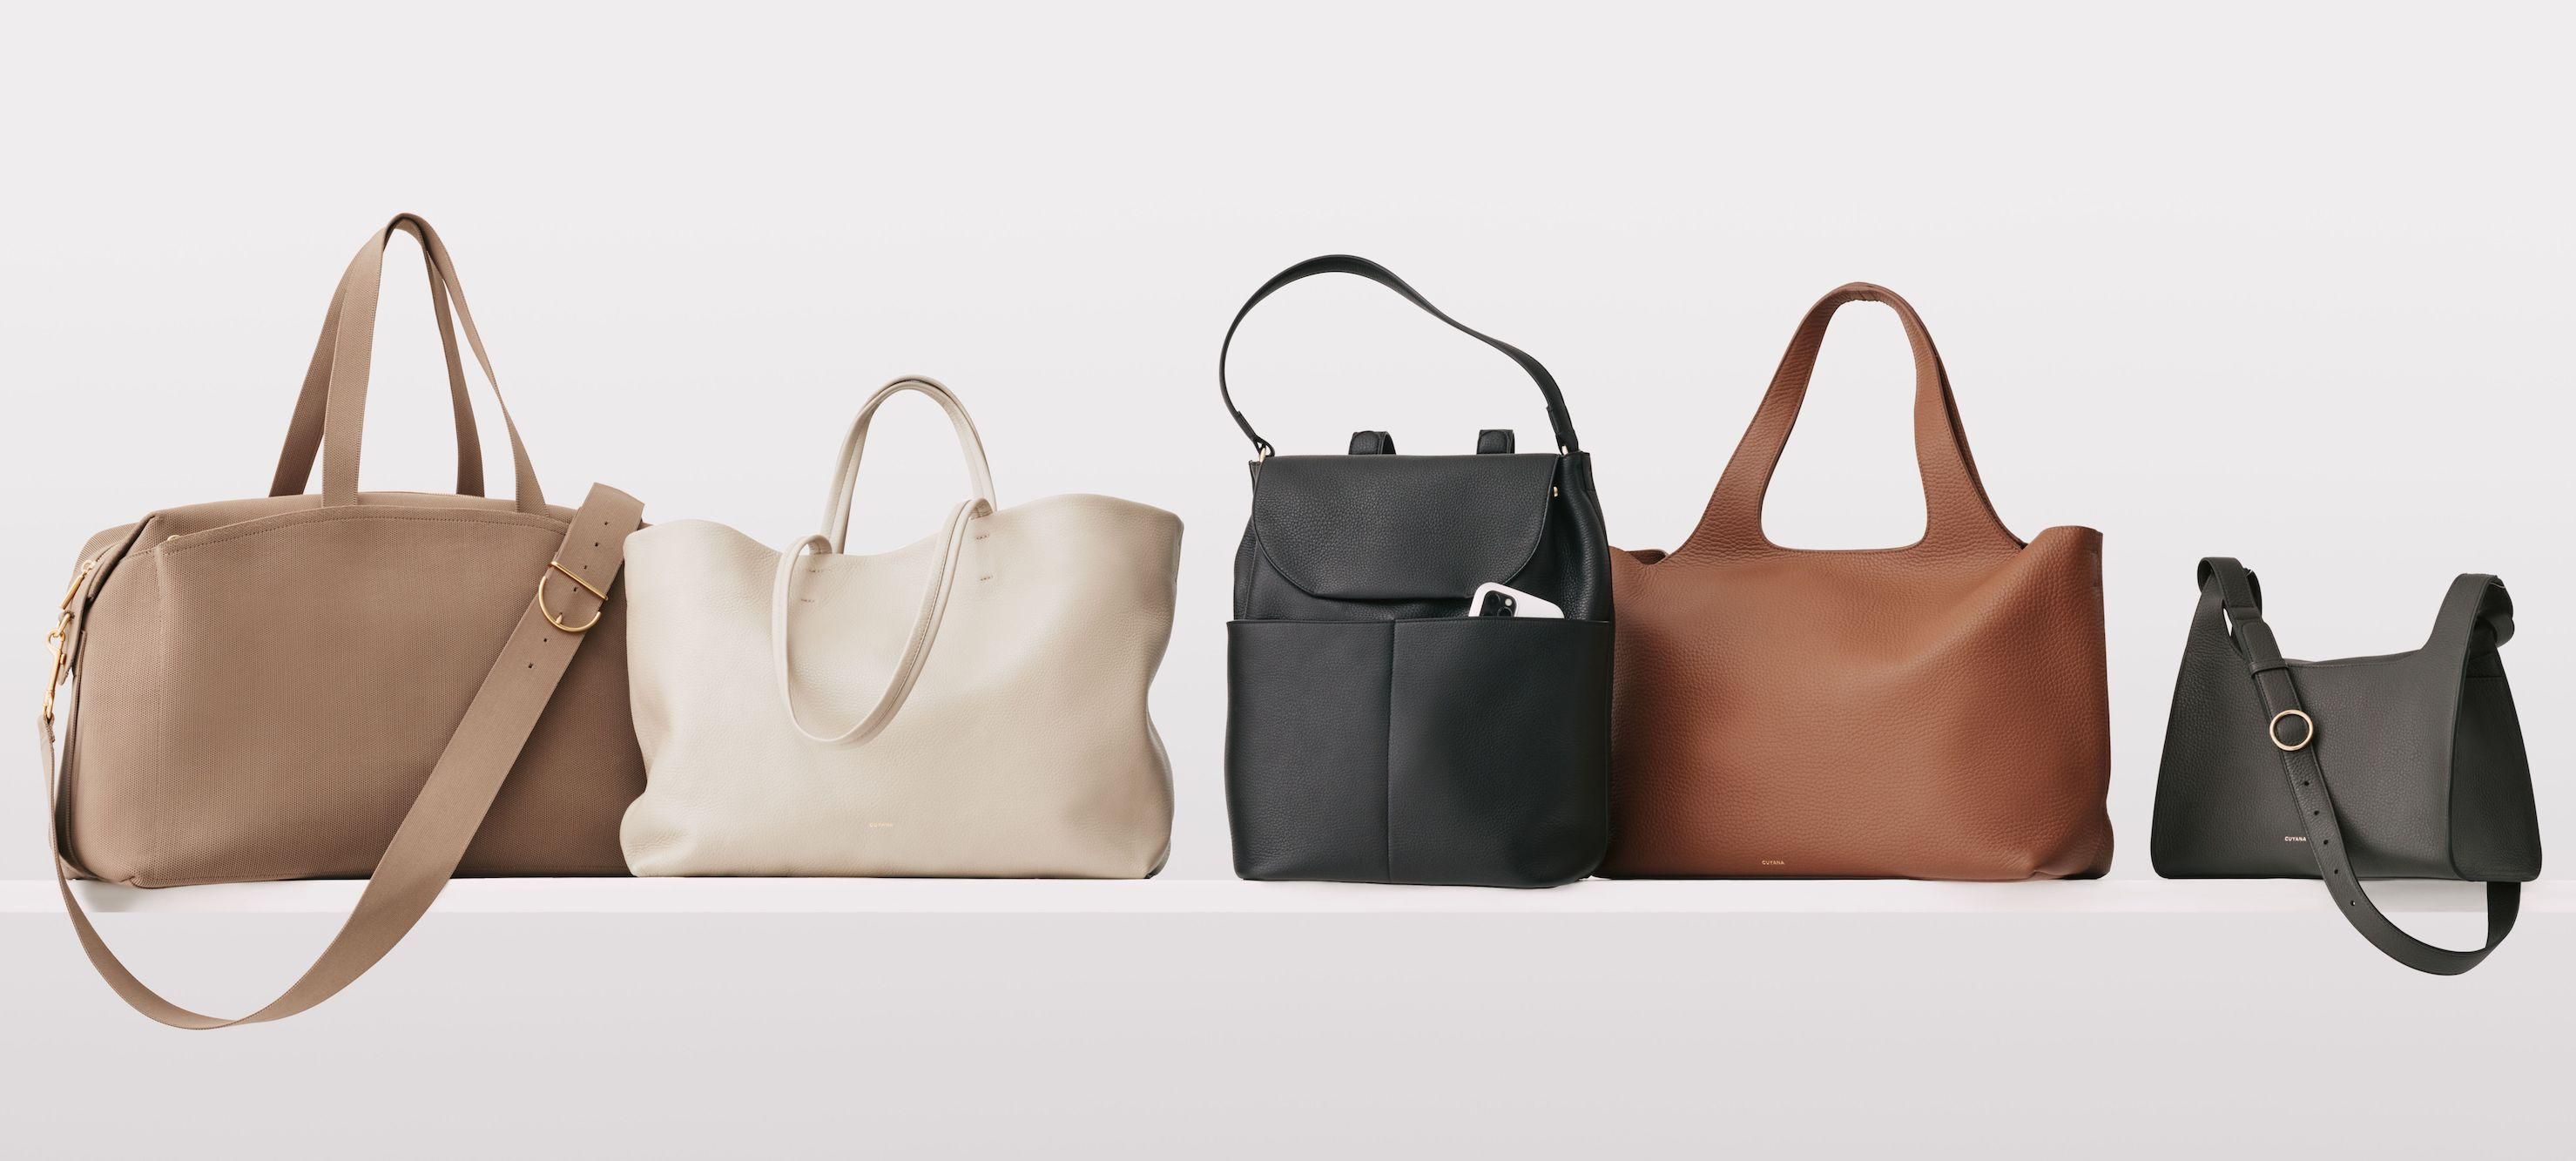 Cuyana Just Debuted a New Work Bag, the System Tote